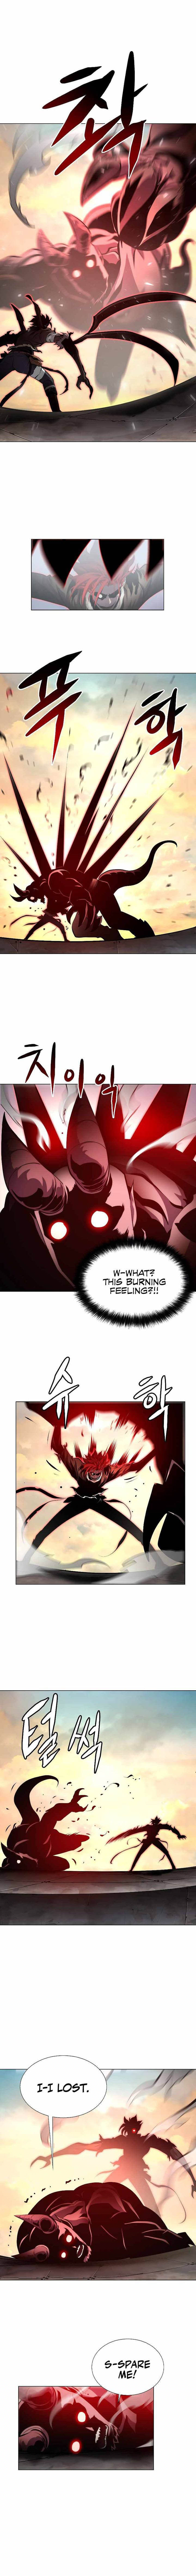 Burnout Shock Chapter 36 Page 3